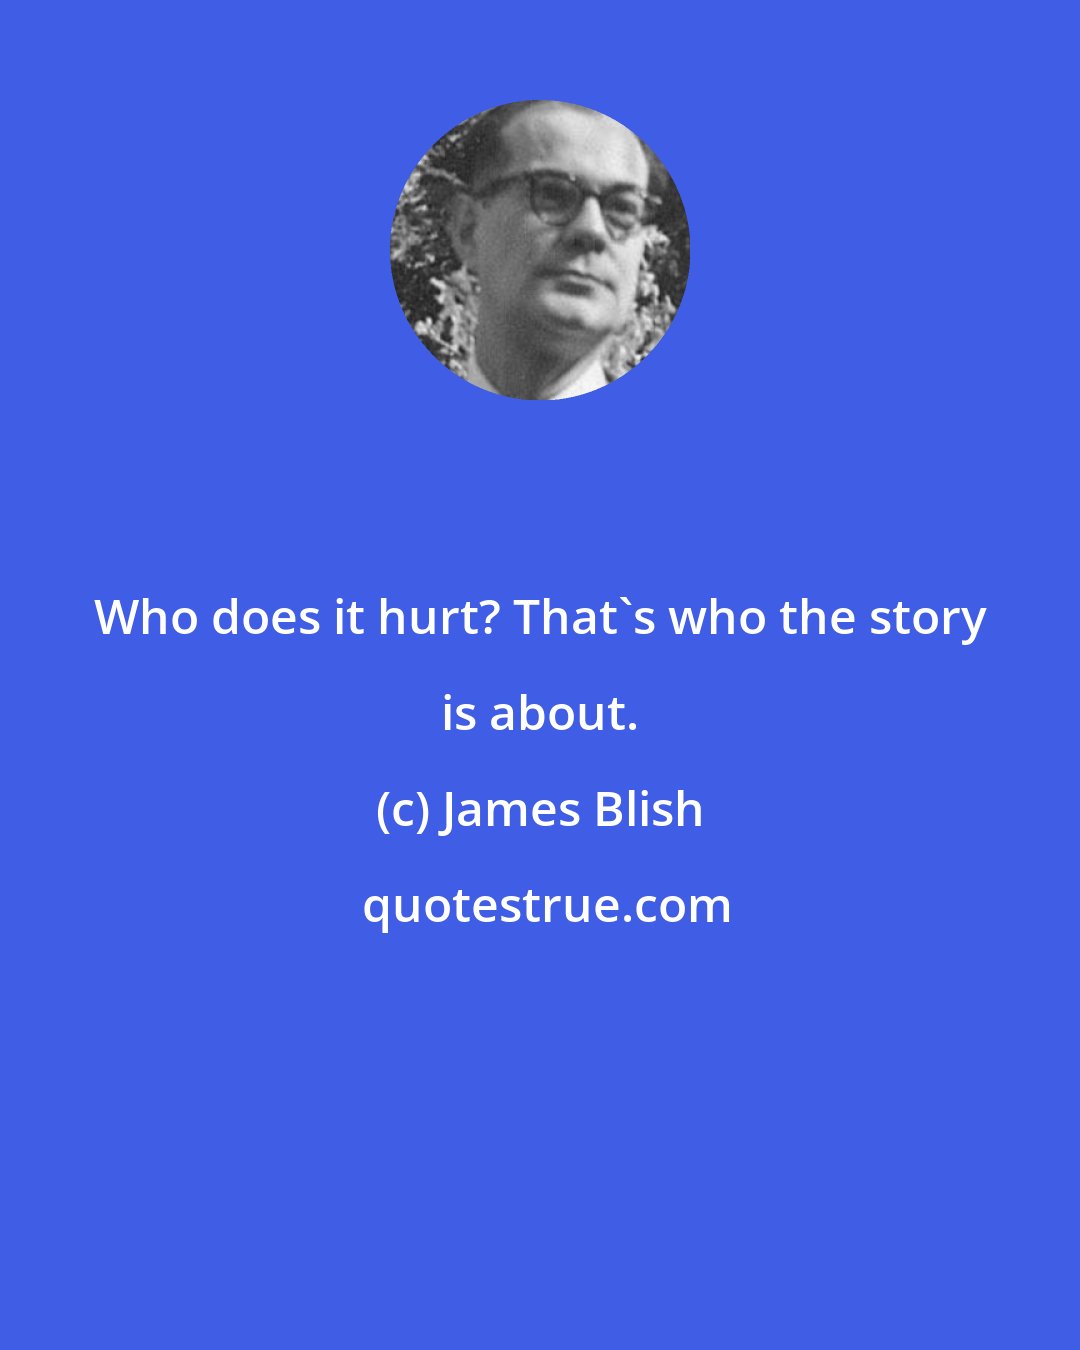 James Blish: Who does it hurt? That's who the story is about.